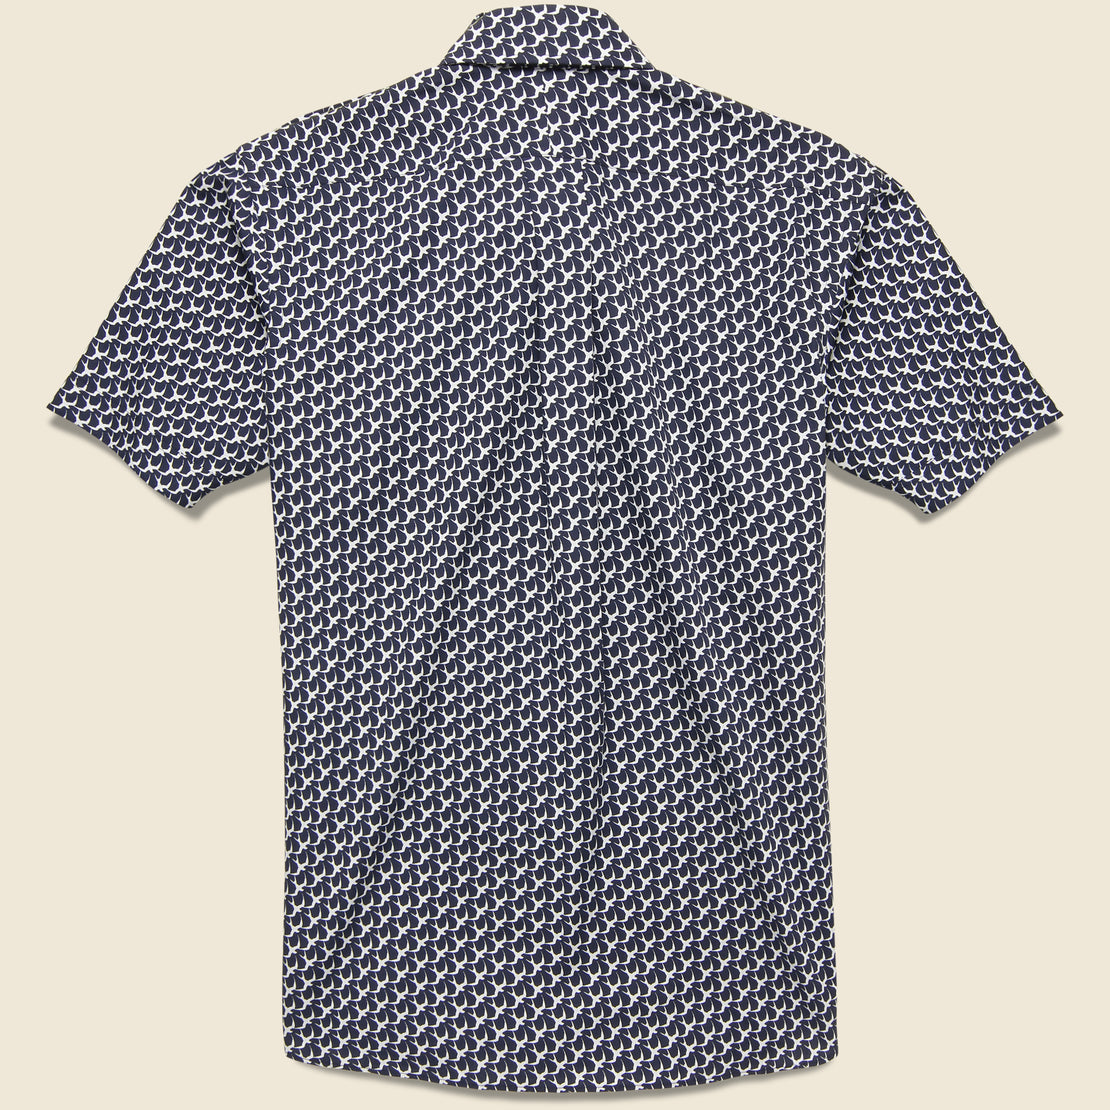 Bird Print Shirt - Navy/White - Hamilton Shirt Co. - STAG Provisions - Tops - S/S Woven - Other Pattern